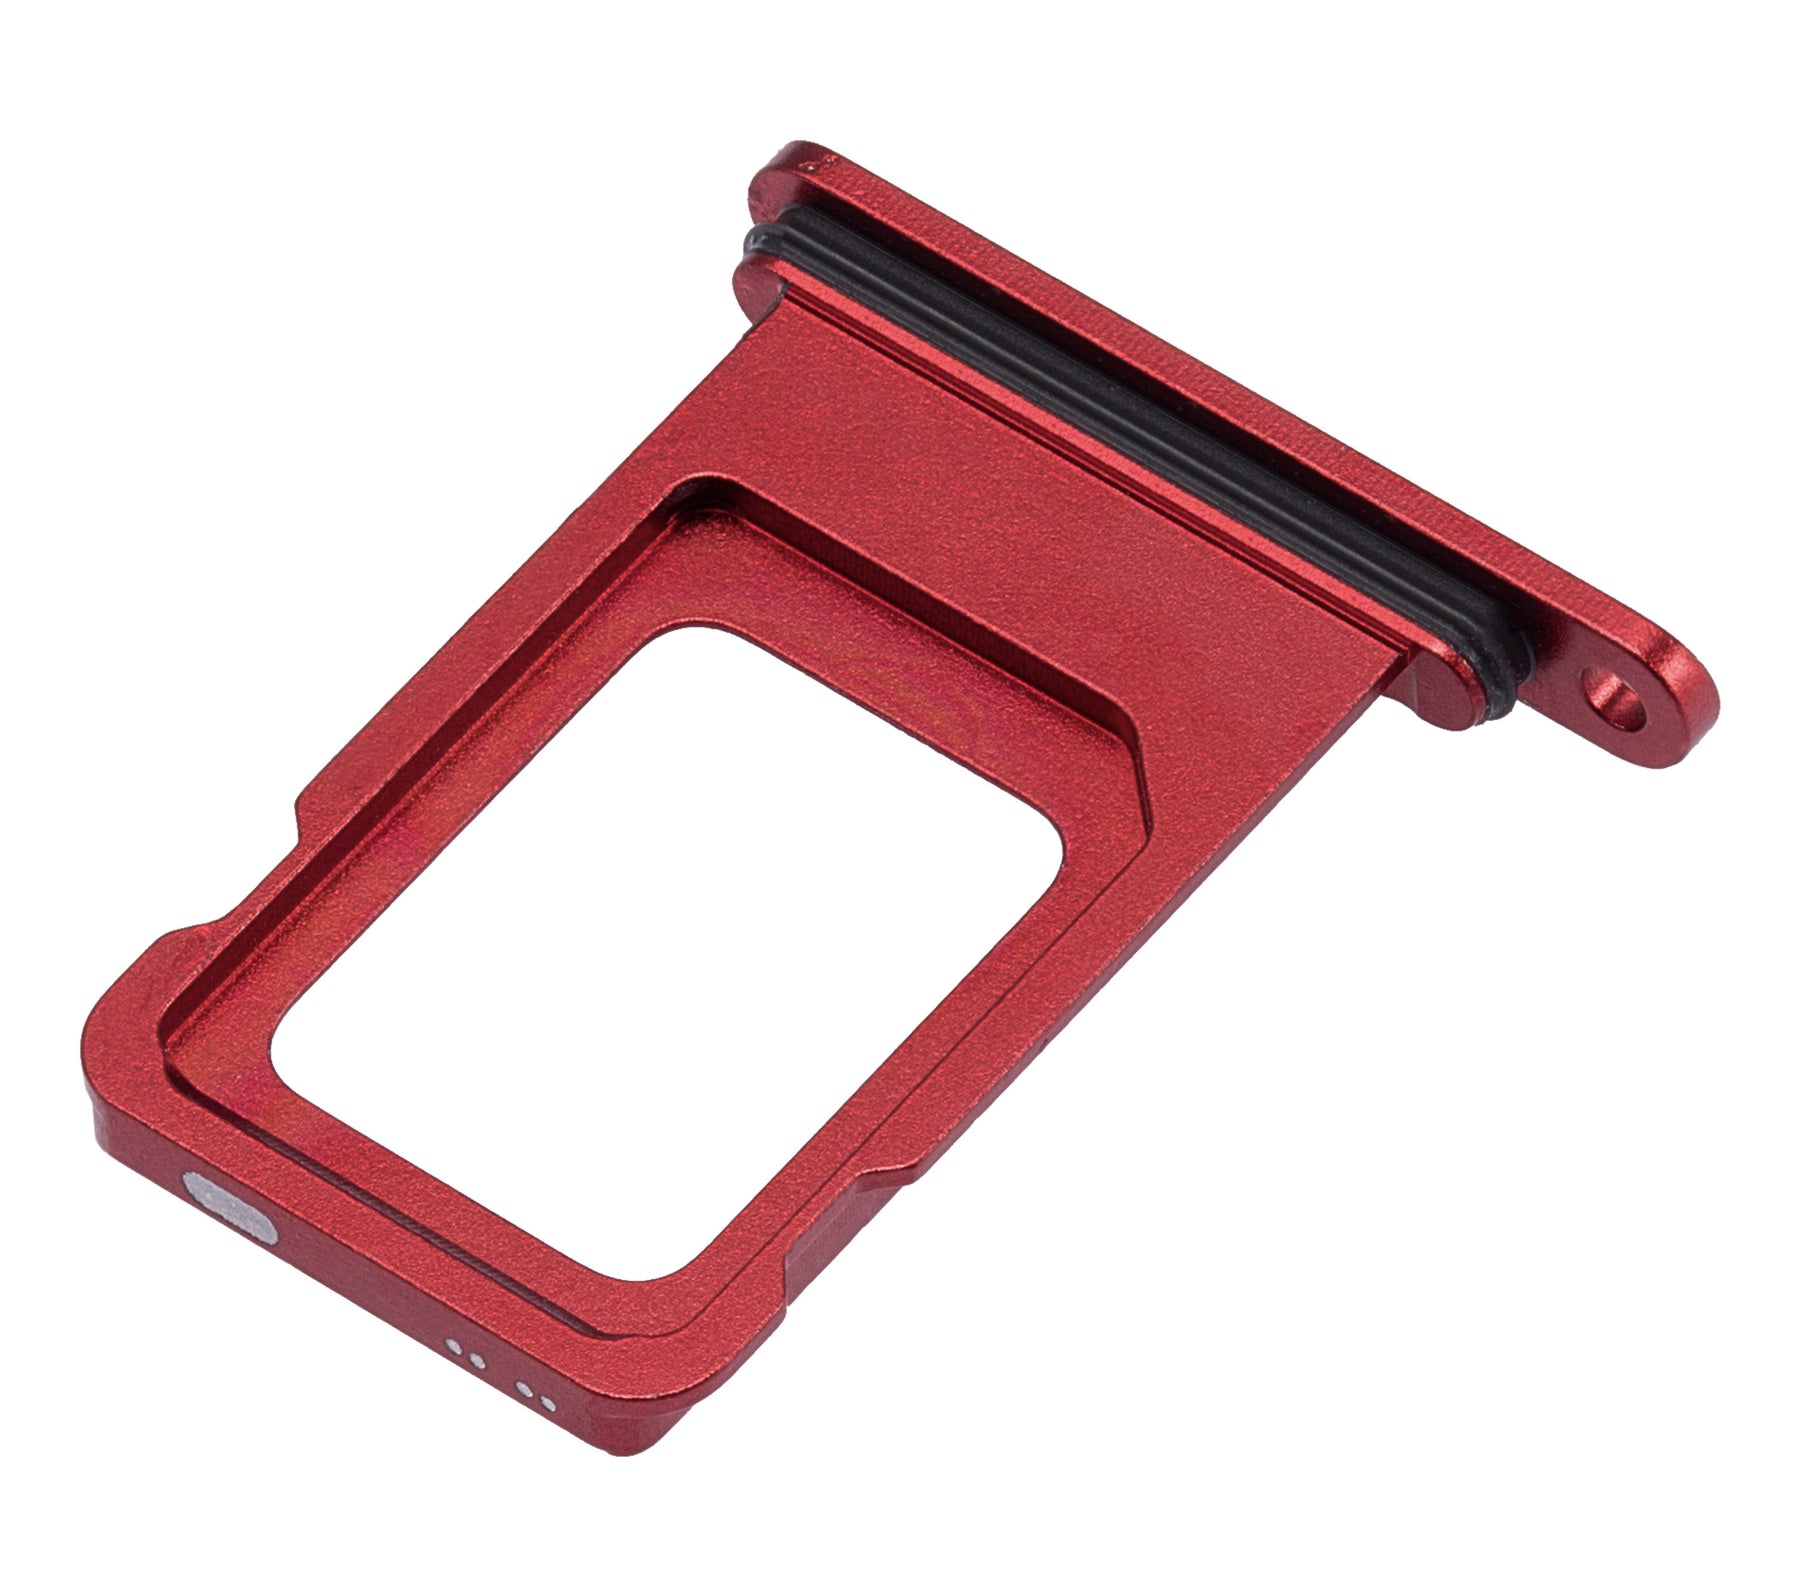 RED DUAL SIM CARD TRAY COMPATIBLE WITH IPHONE XR